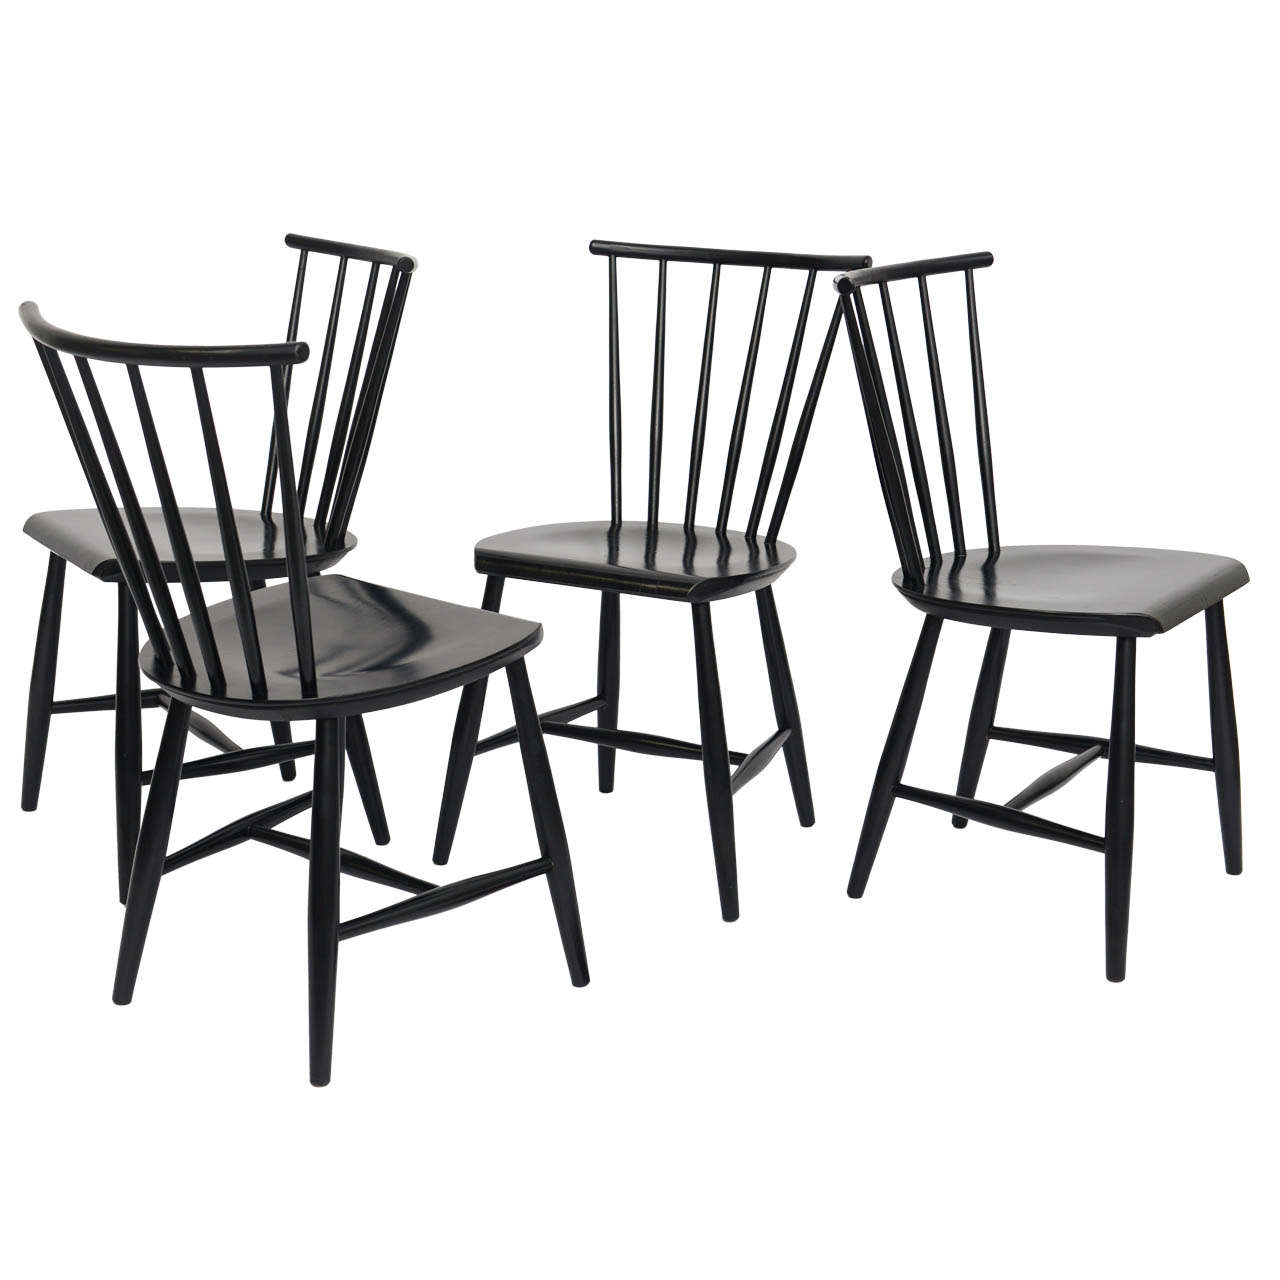 Four 1950s Swedish Windsor Style Spindle Back Dining Chairs